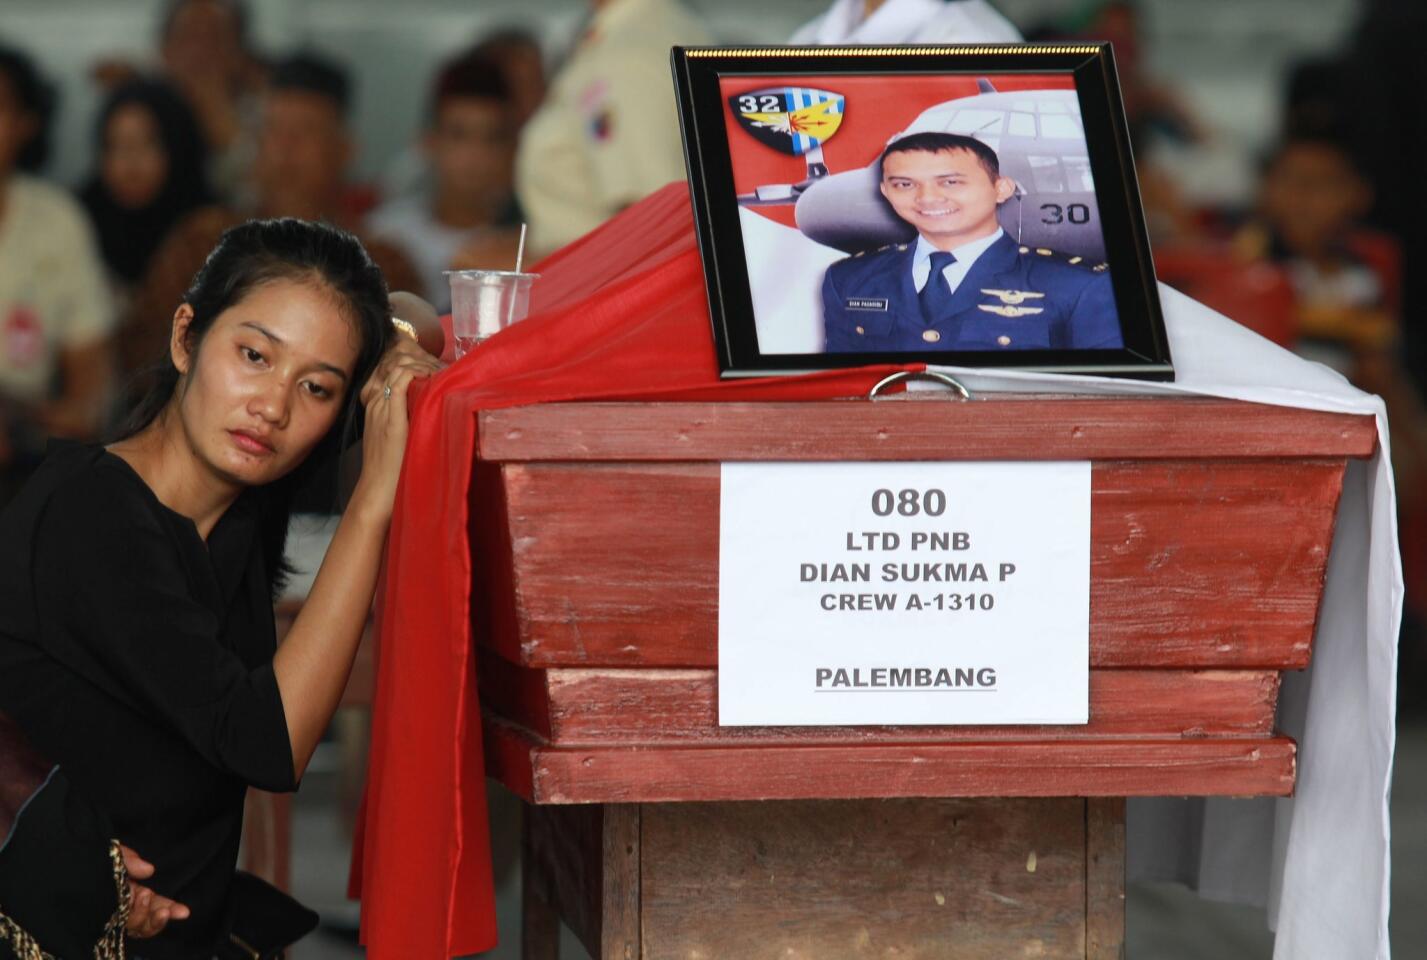 An Indonesian woman mourns beside the coffin of her relative, one of the victims of the crashed C-130 military airplane at a military airbase in Medan, North Sumatra, Indonesia on July 1, 2015.